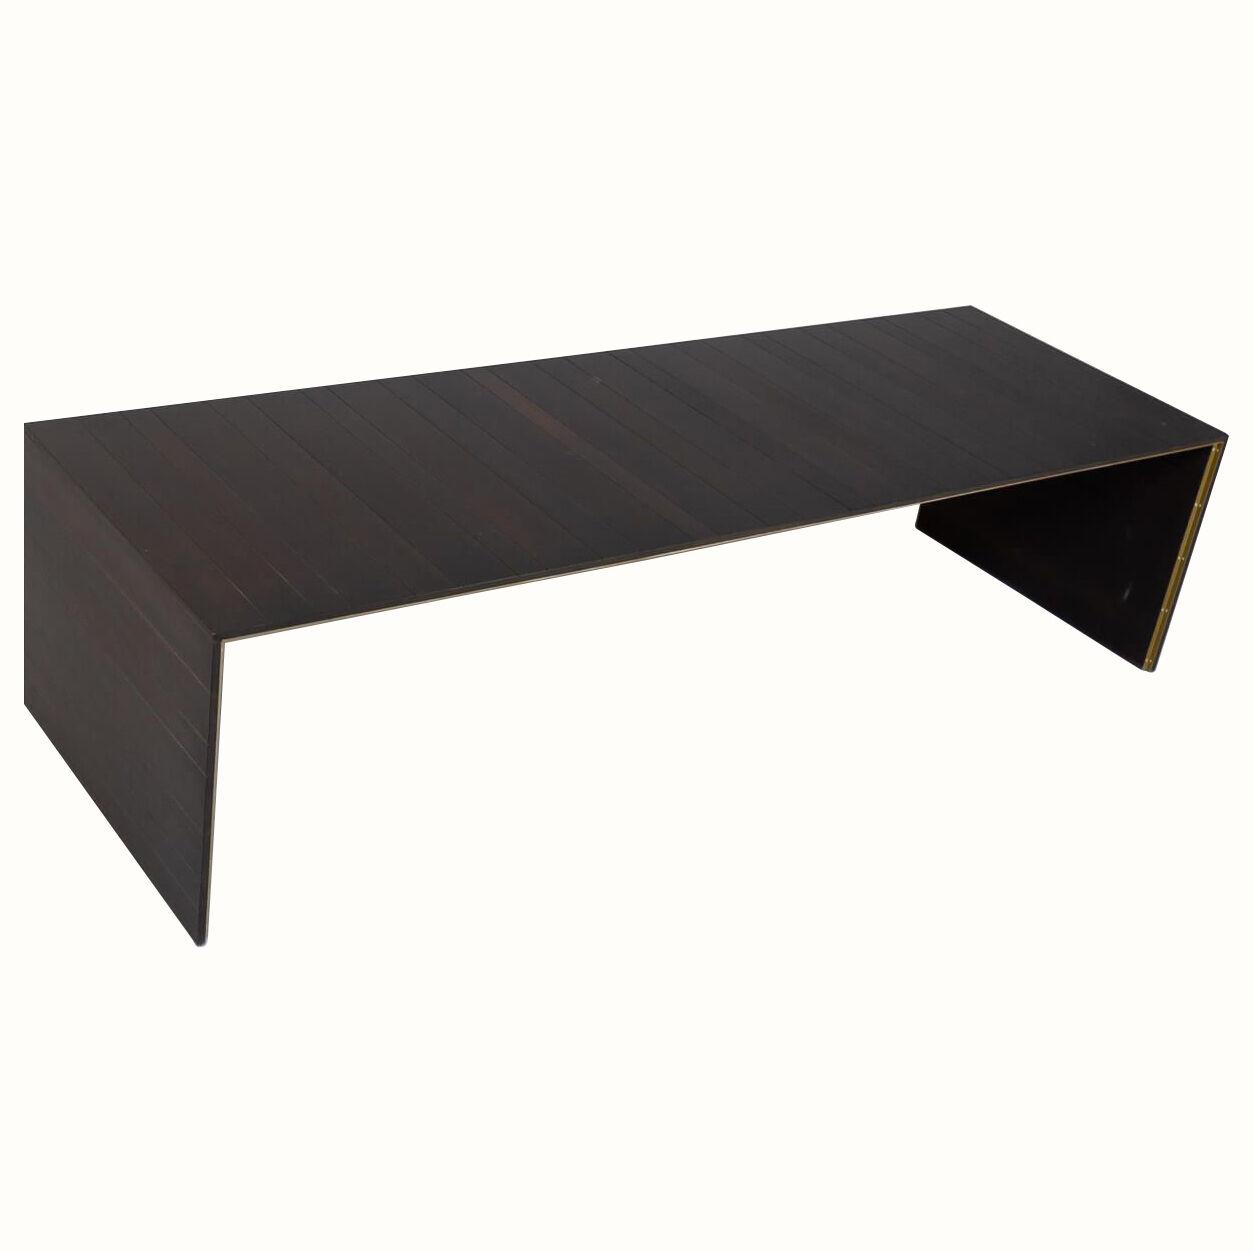 00s Henk Vos ‘black kabbes’ 300cm dining table for Linteloo